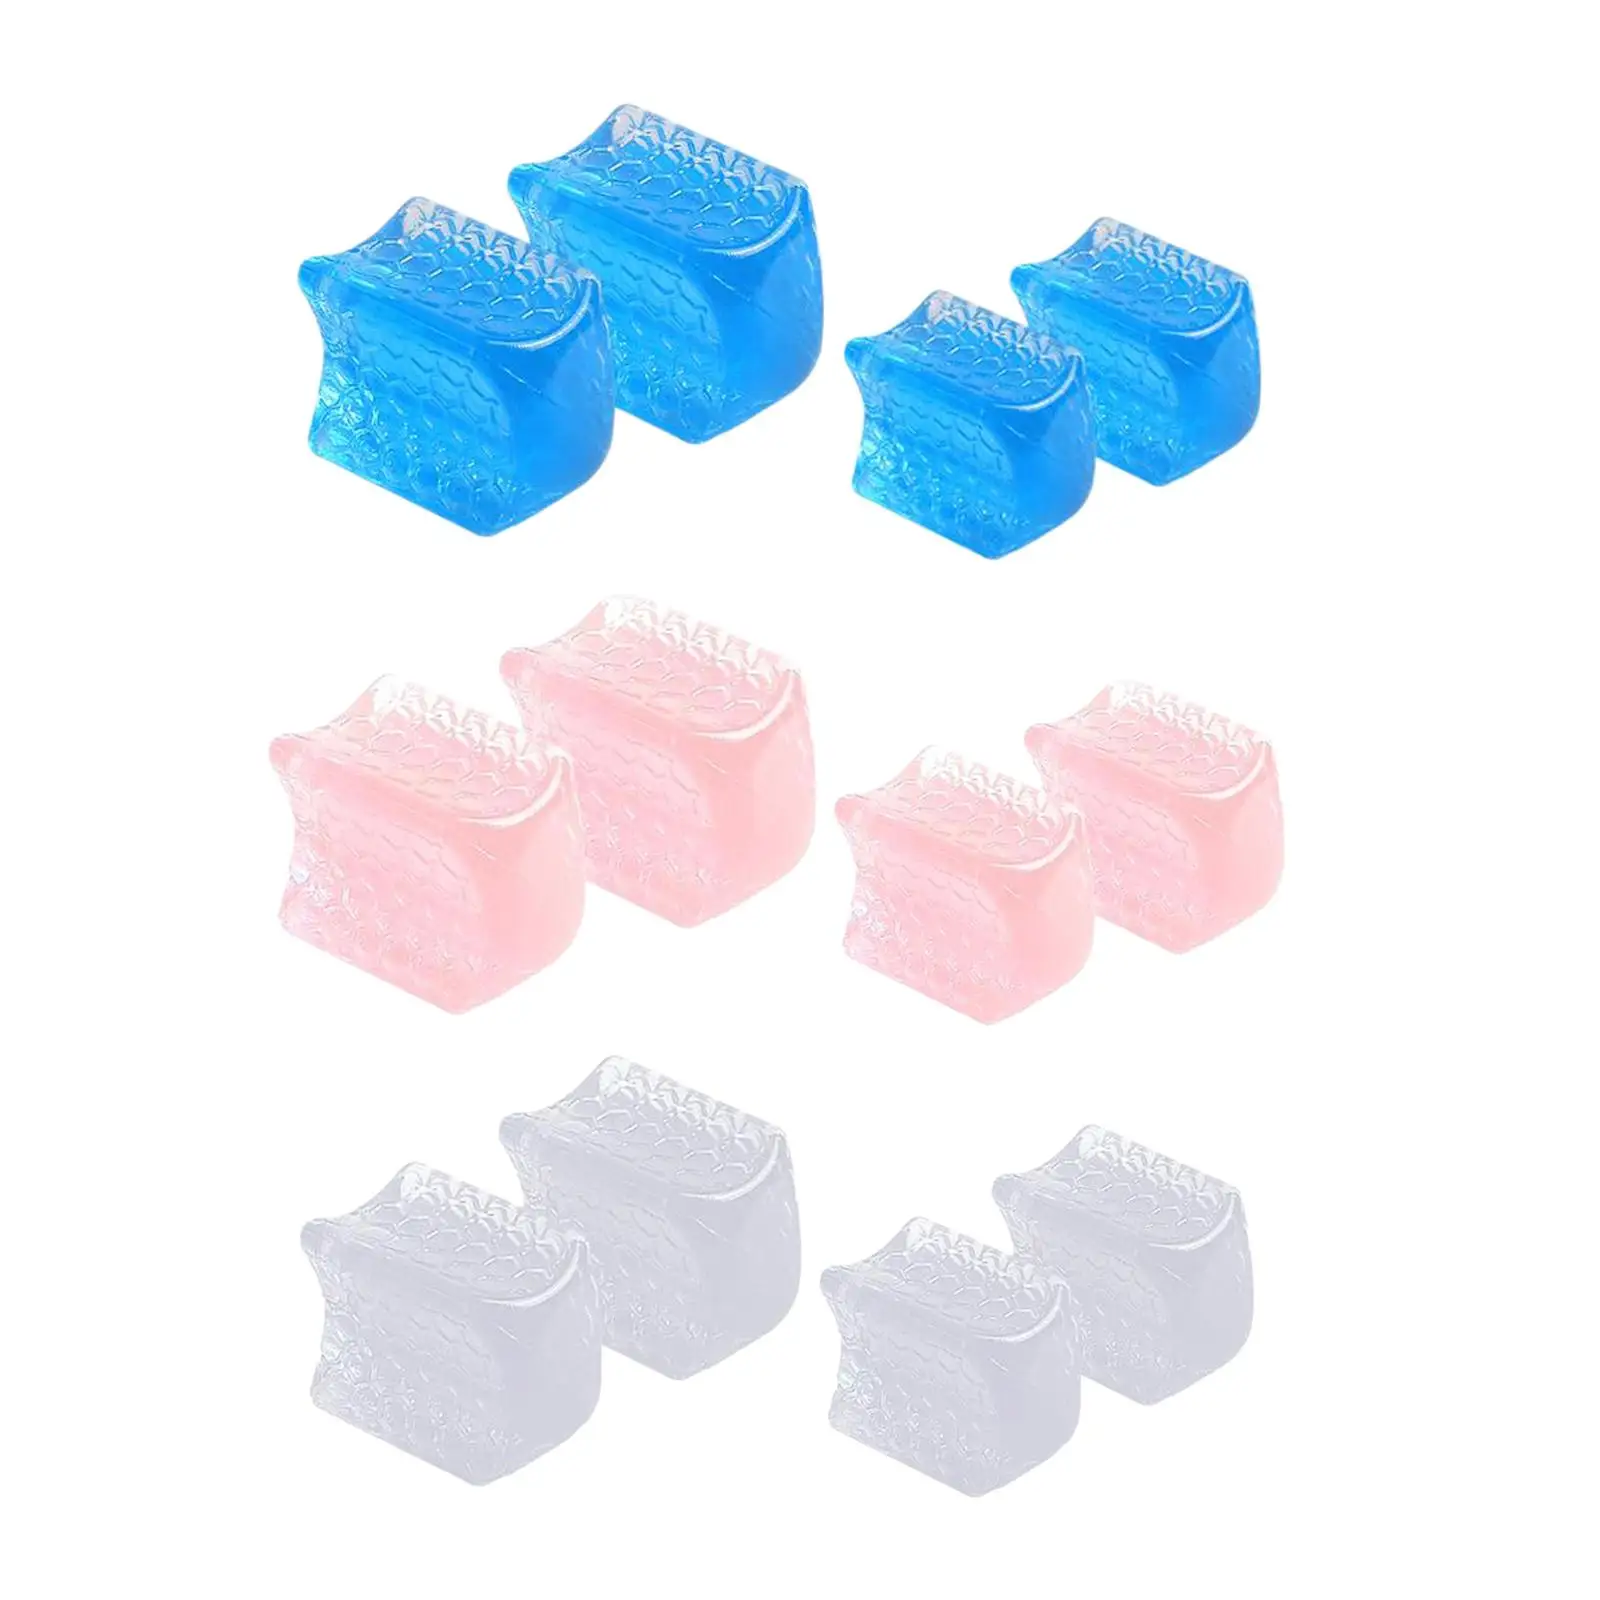 4 Pieces Silicone Toe Separators Stretcher Cushions Corrector Protector Washable Reusable Easy to Clean Separate Overlapping Toe